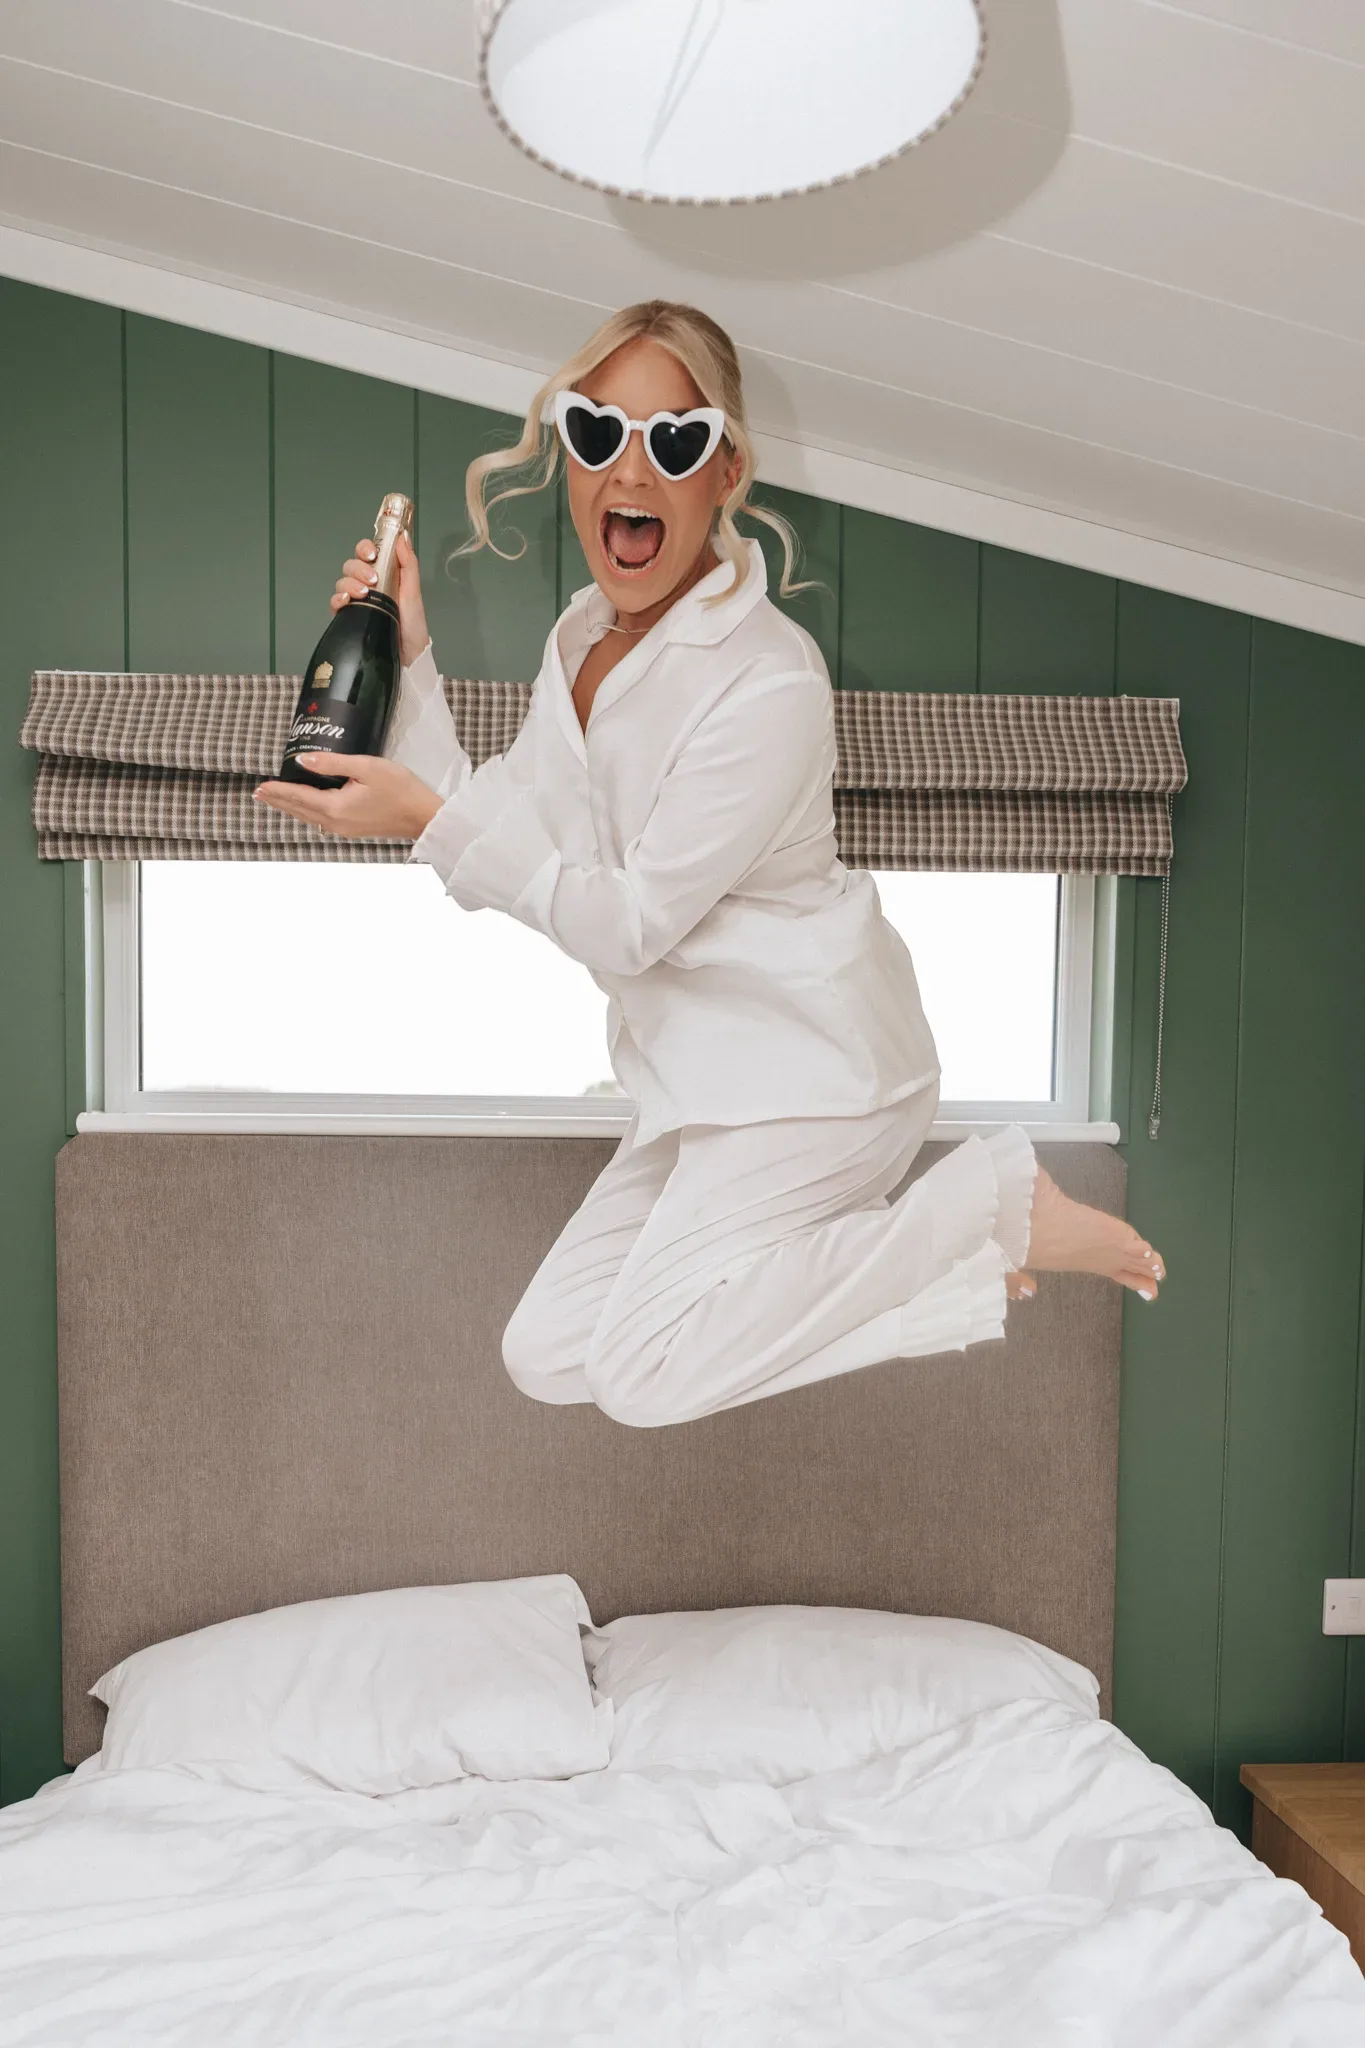 A joyful woman in white pajamas and heart-shaped sunglasses jumps on a bed, holding a champagne bottle. her mouth is open in mid-cheer, and the room has a cozy, green-walled interior with a window above the headboard.